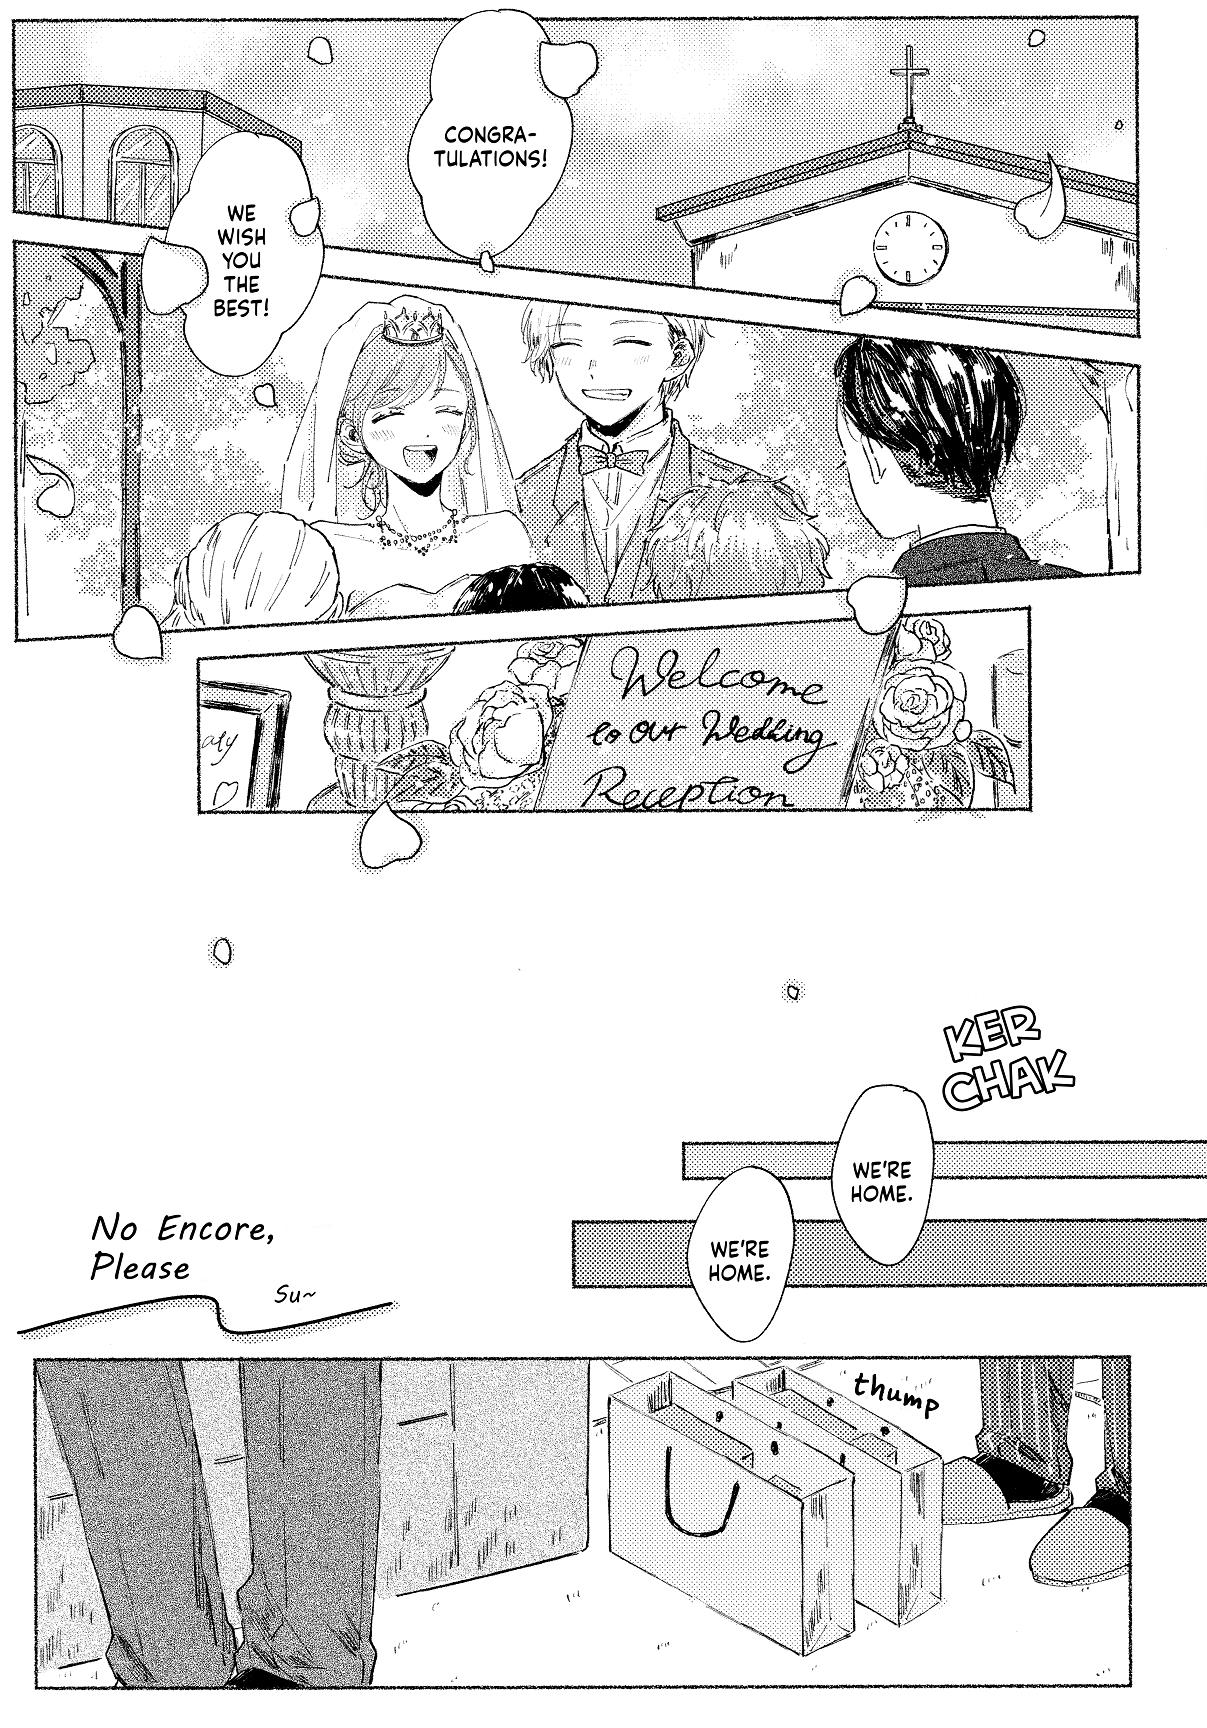 Cheers! - Shouto X Katsuki Marriage Anthology Vol.1 Chapter 13: No Encore, Please - Picture 2